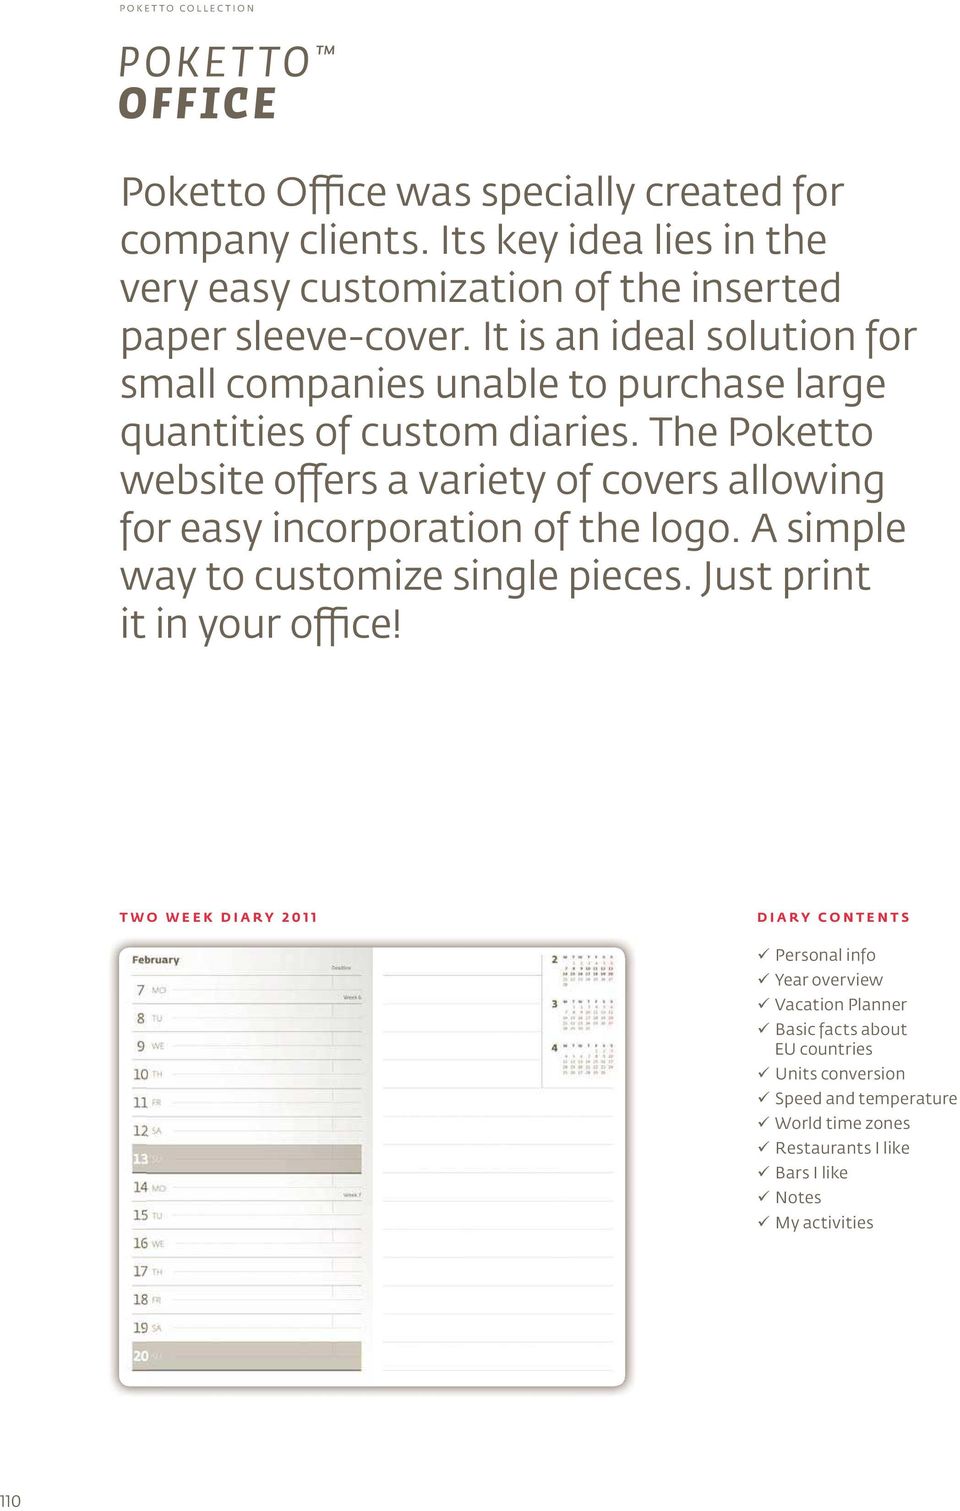 It is an ideal solution for small companies unable to purchase large quantities of custom diaries.